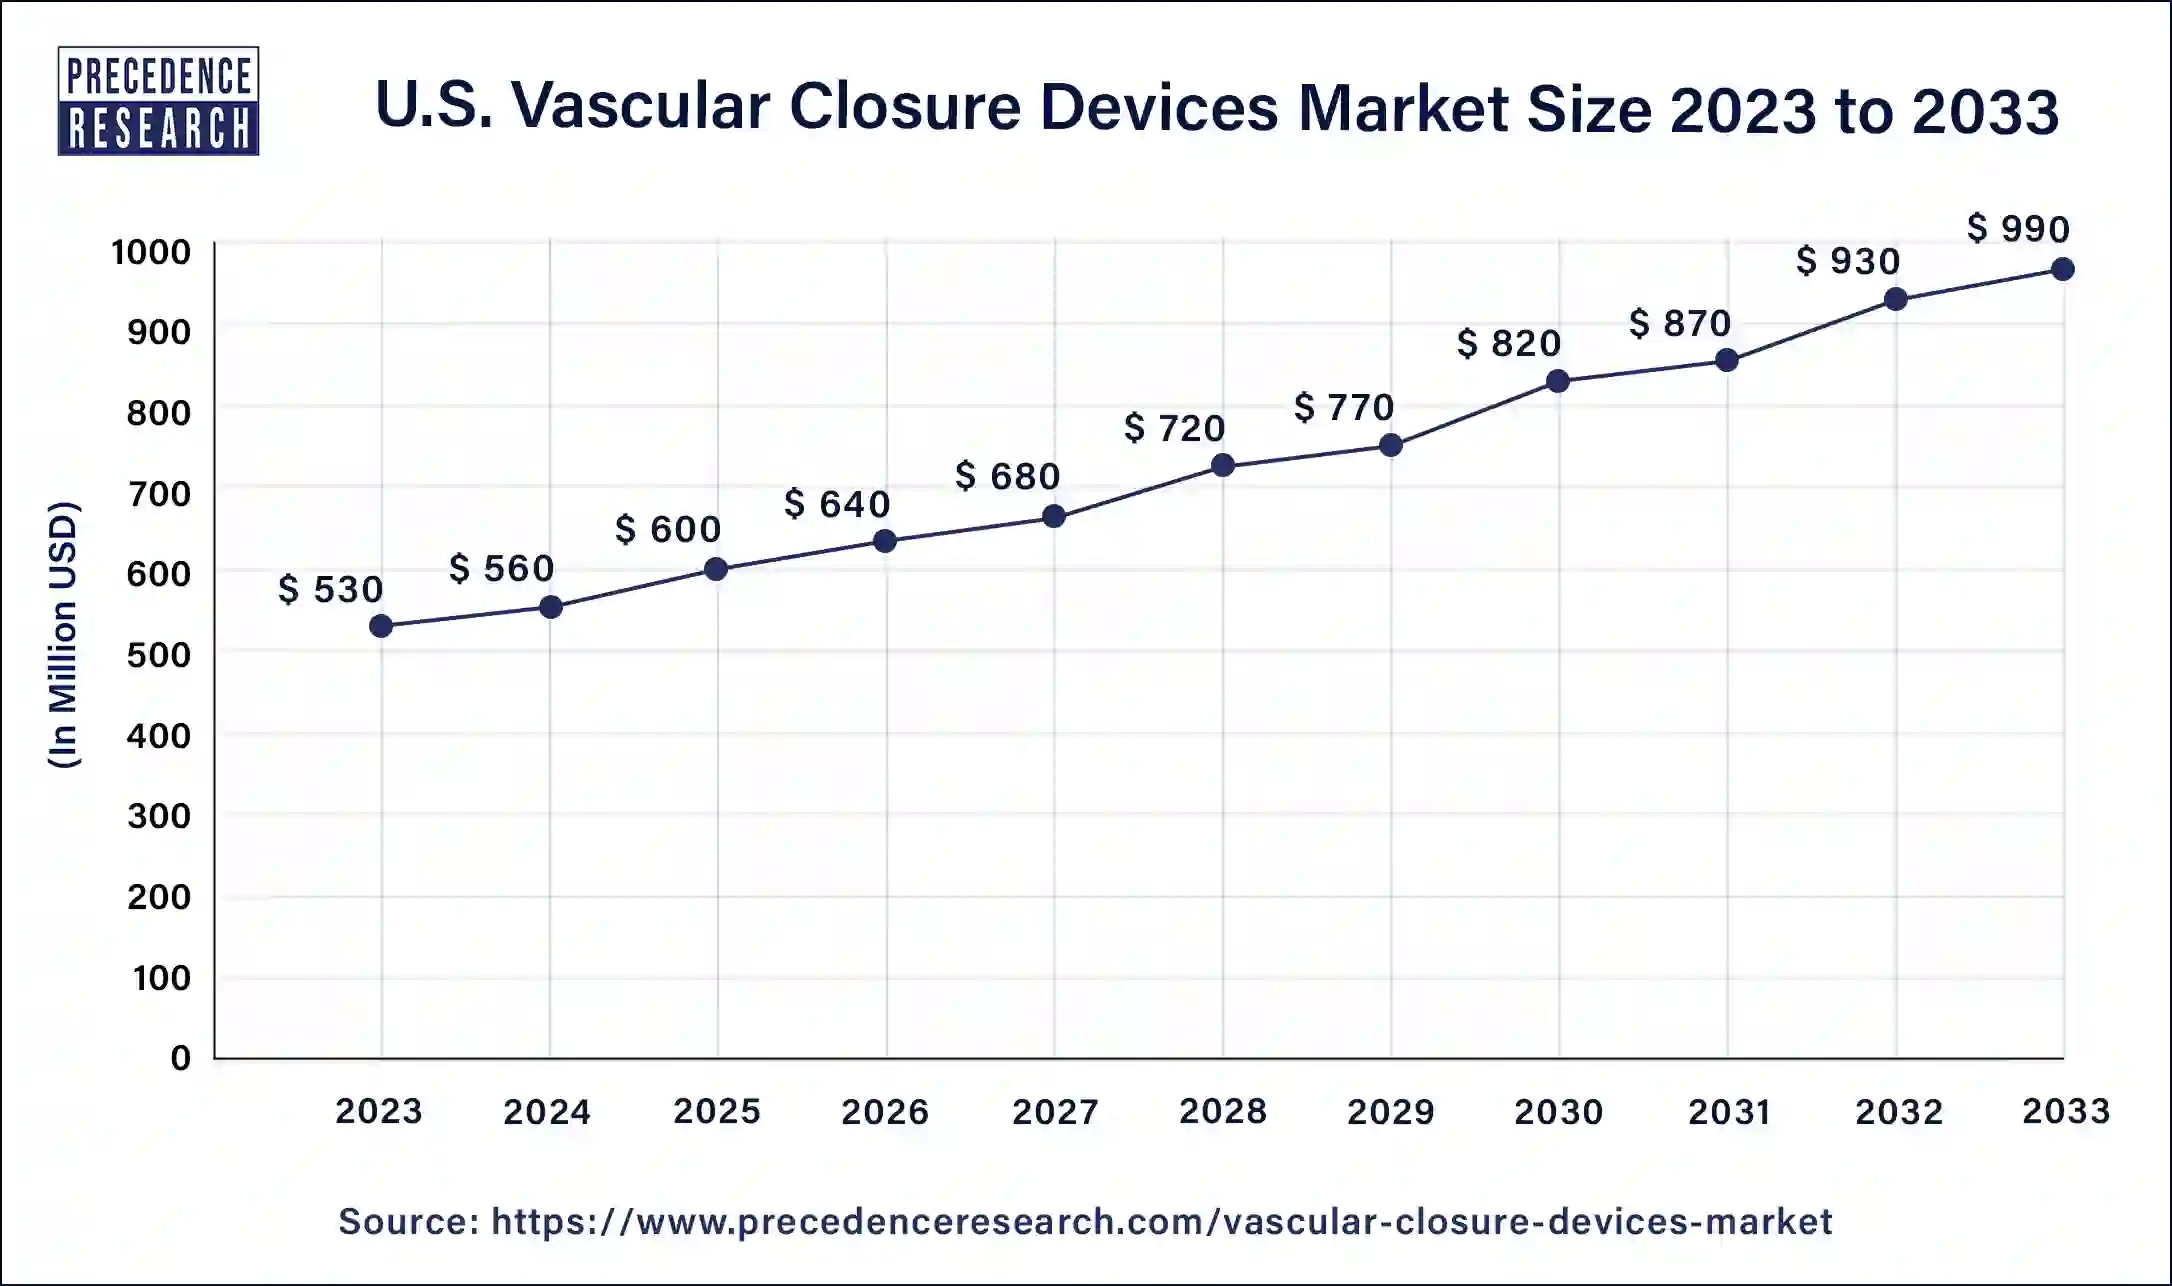 U.S. Vascular Closure Devices Market Size 2024 to 2033